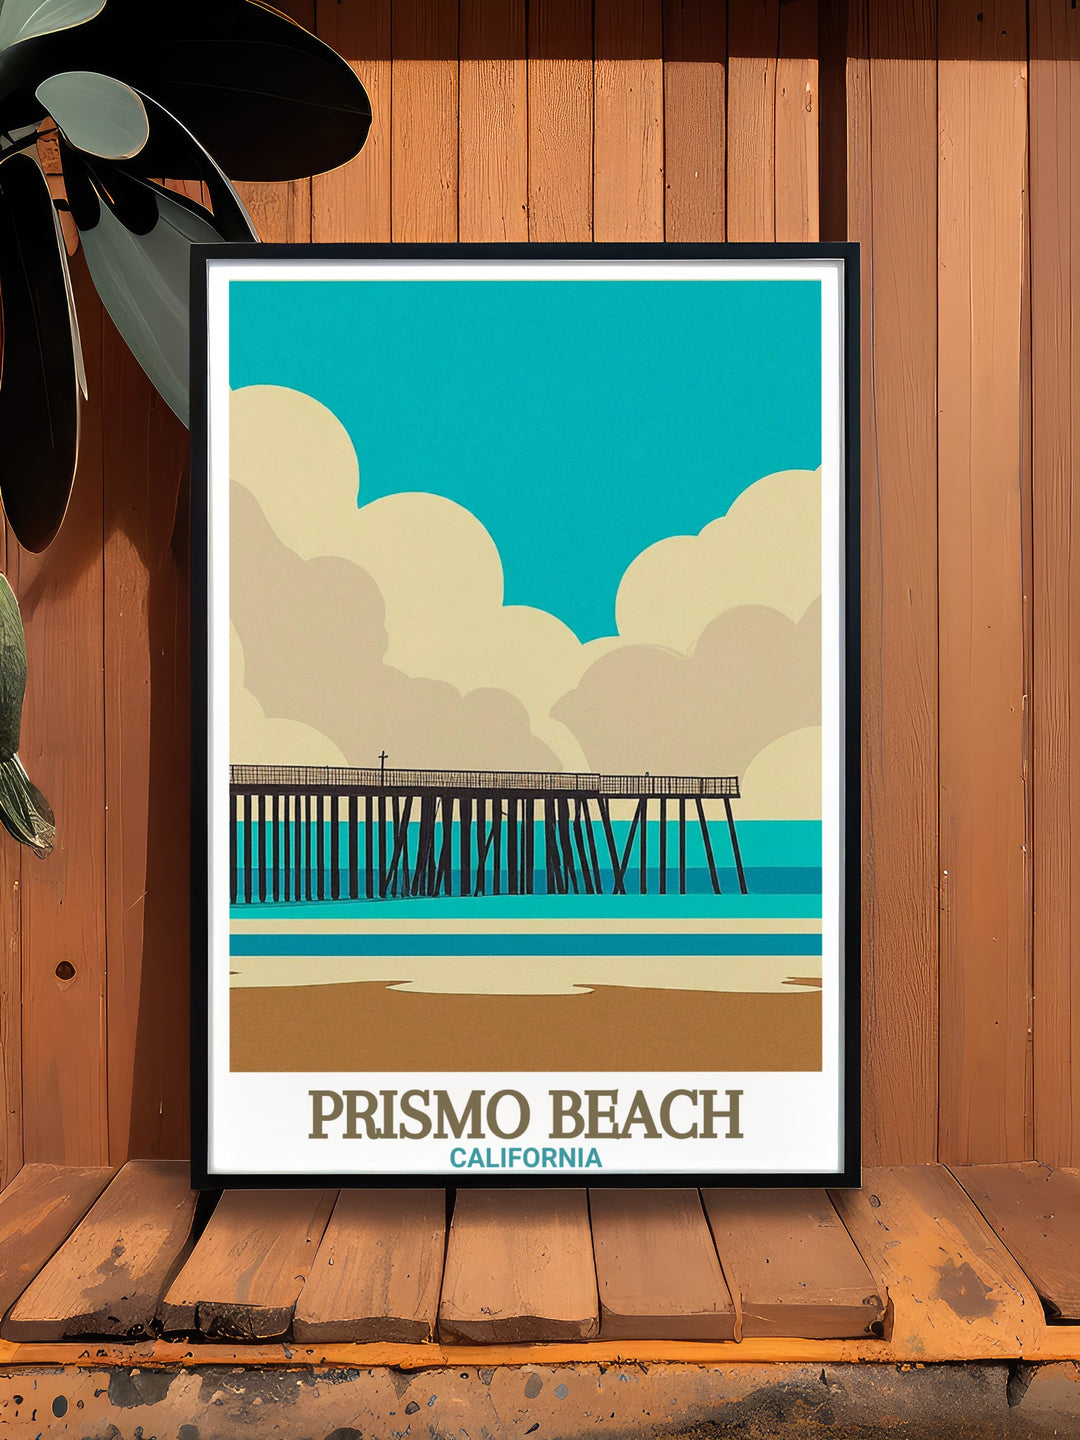 Beautiful Pismo Beach Art in a California Print ideal for adding coastal charm to your living space Pismo Beach Pier artwork brings elegance and tranquility to any room